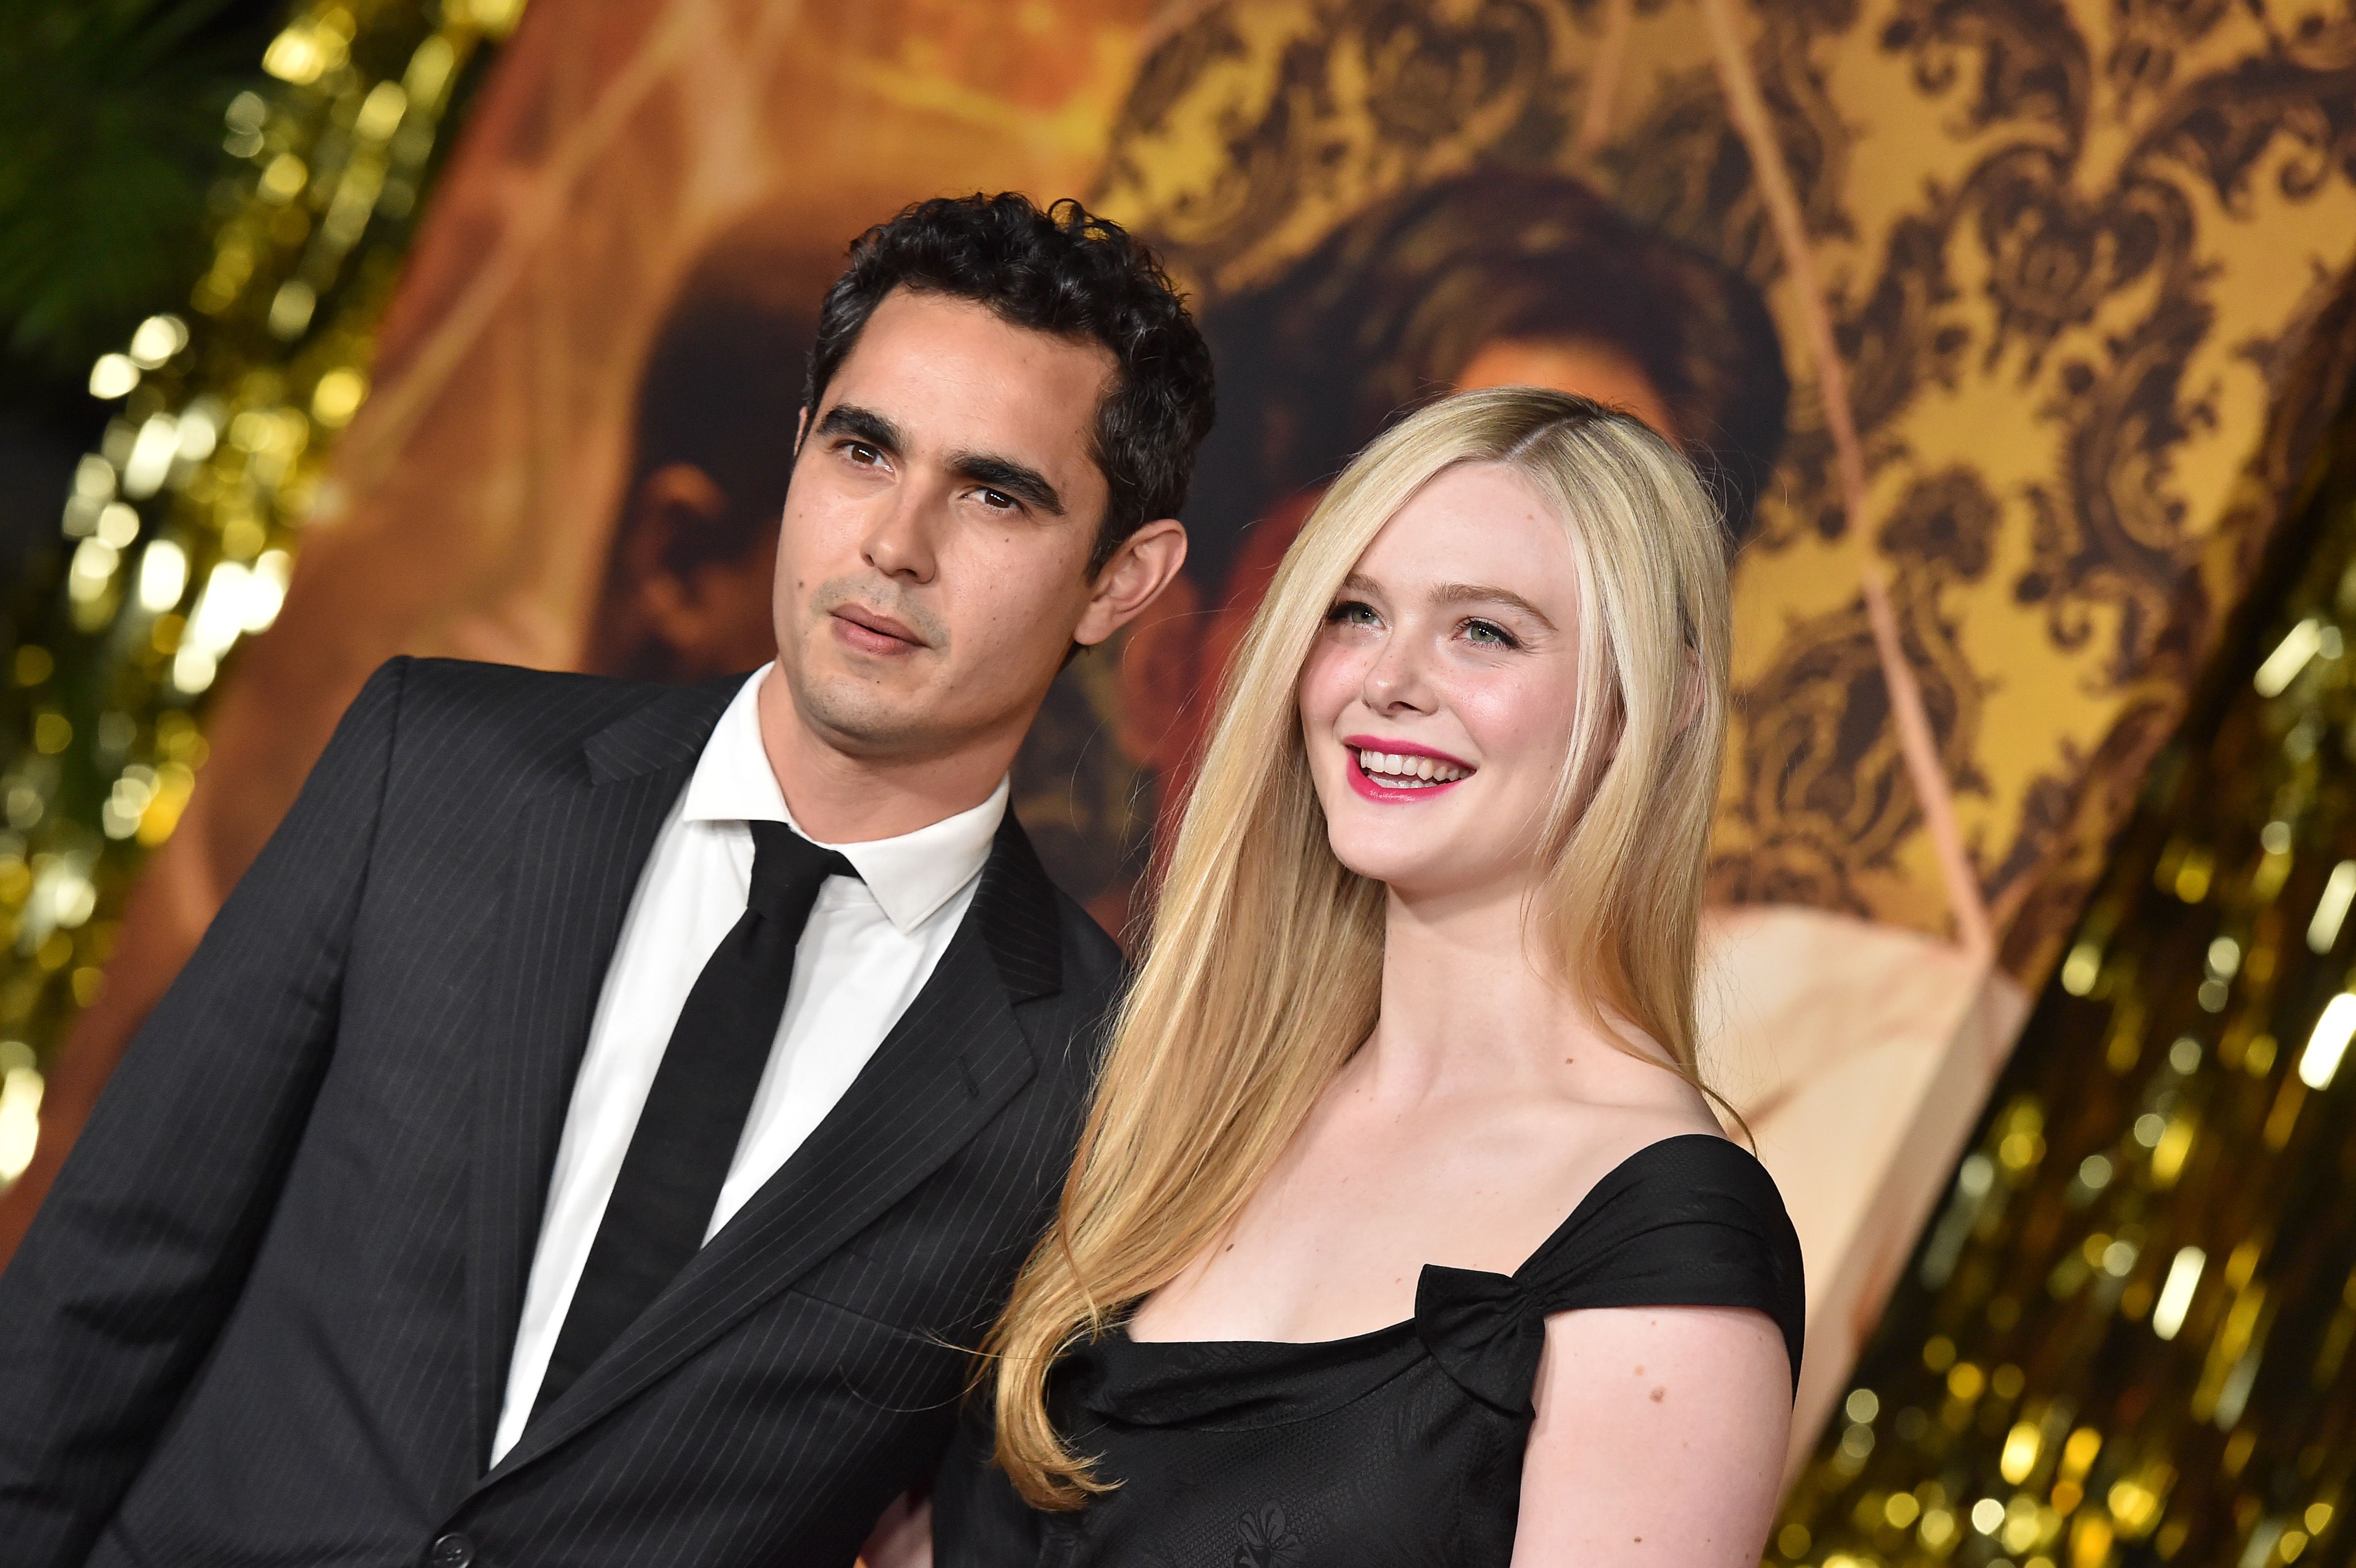 Who Is Elle Fanning's Ex-Boyfriend? All About Max Minghella